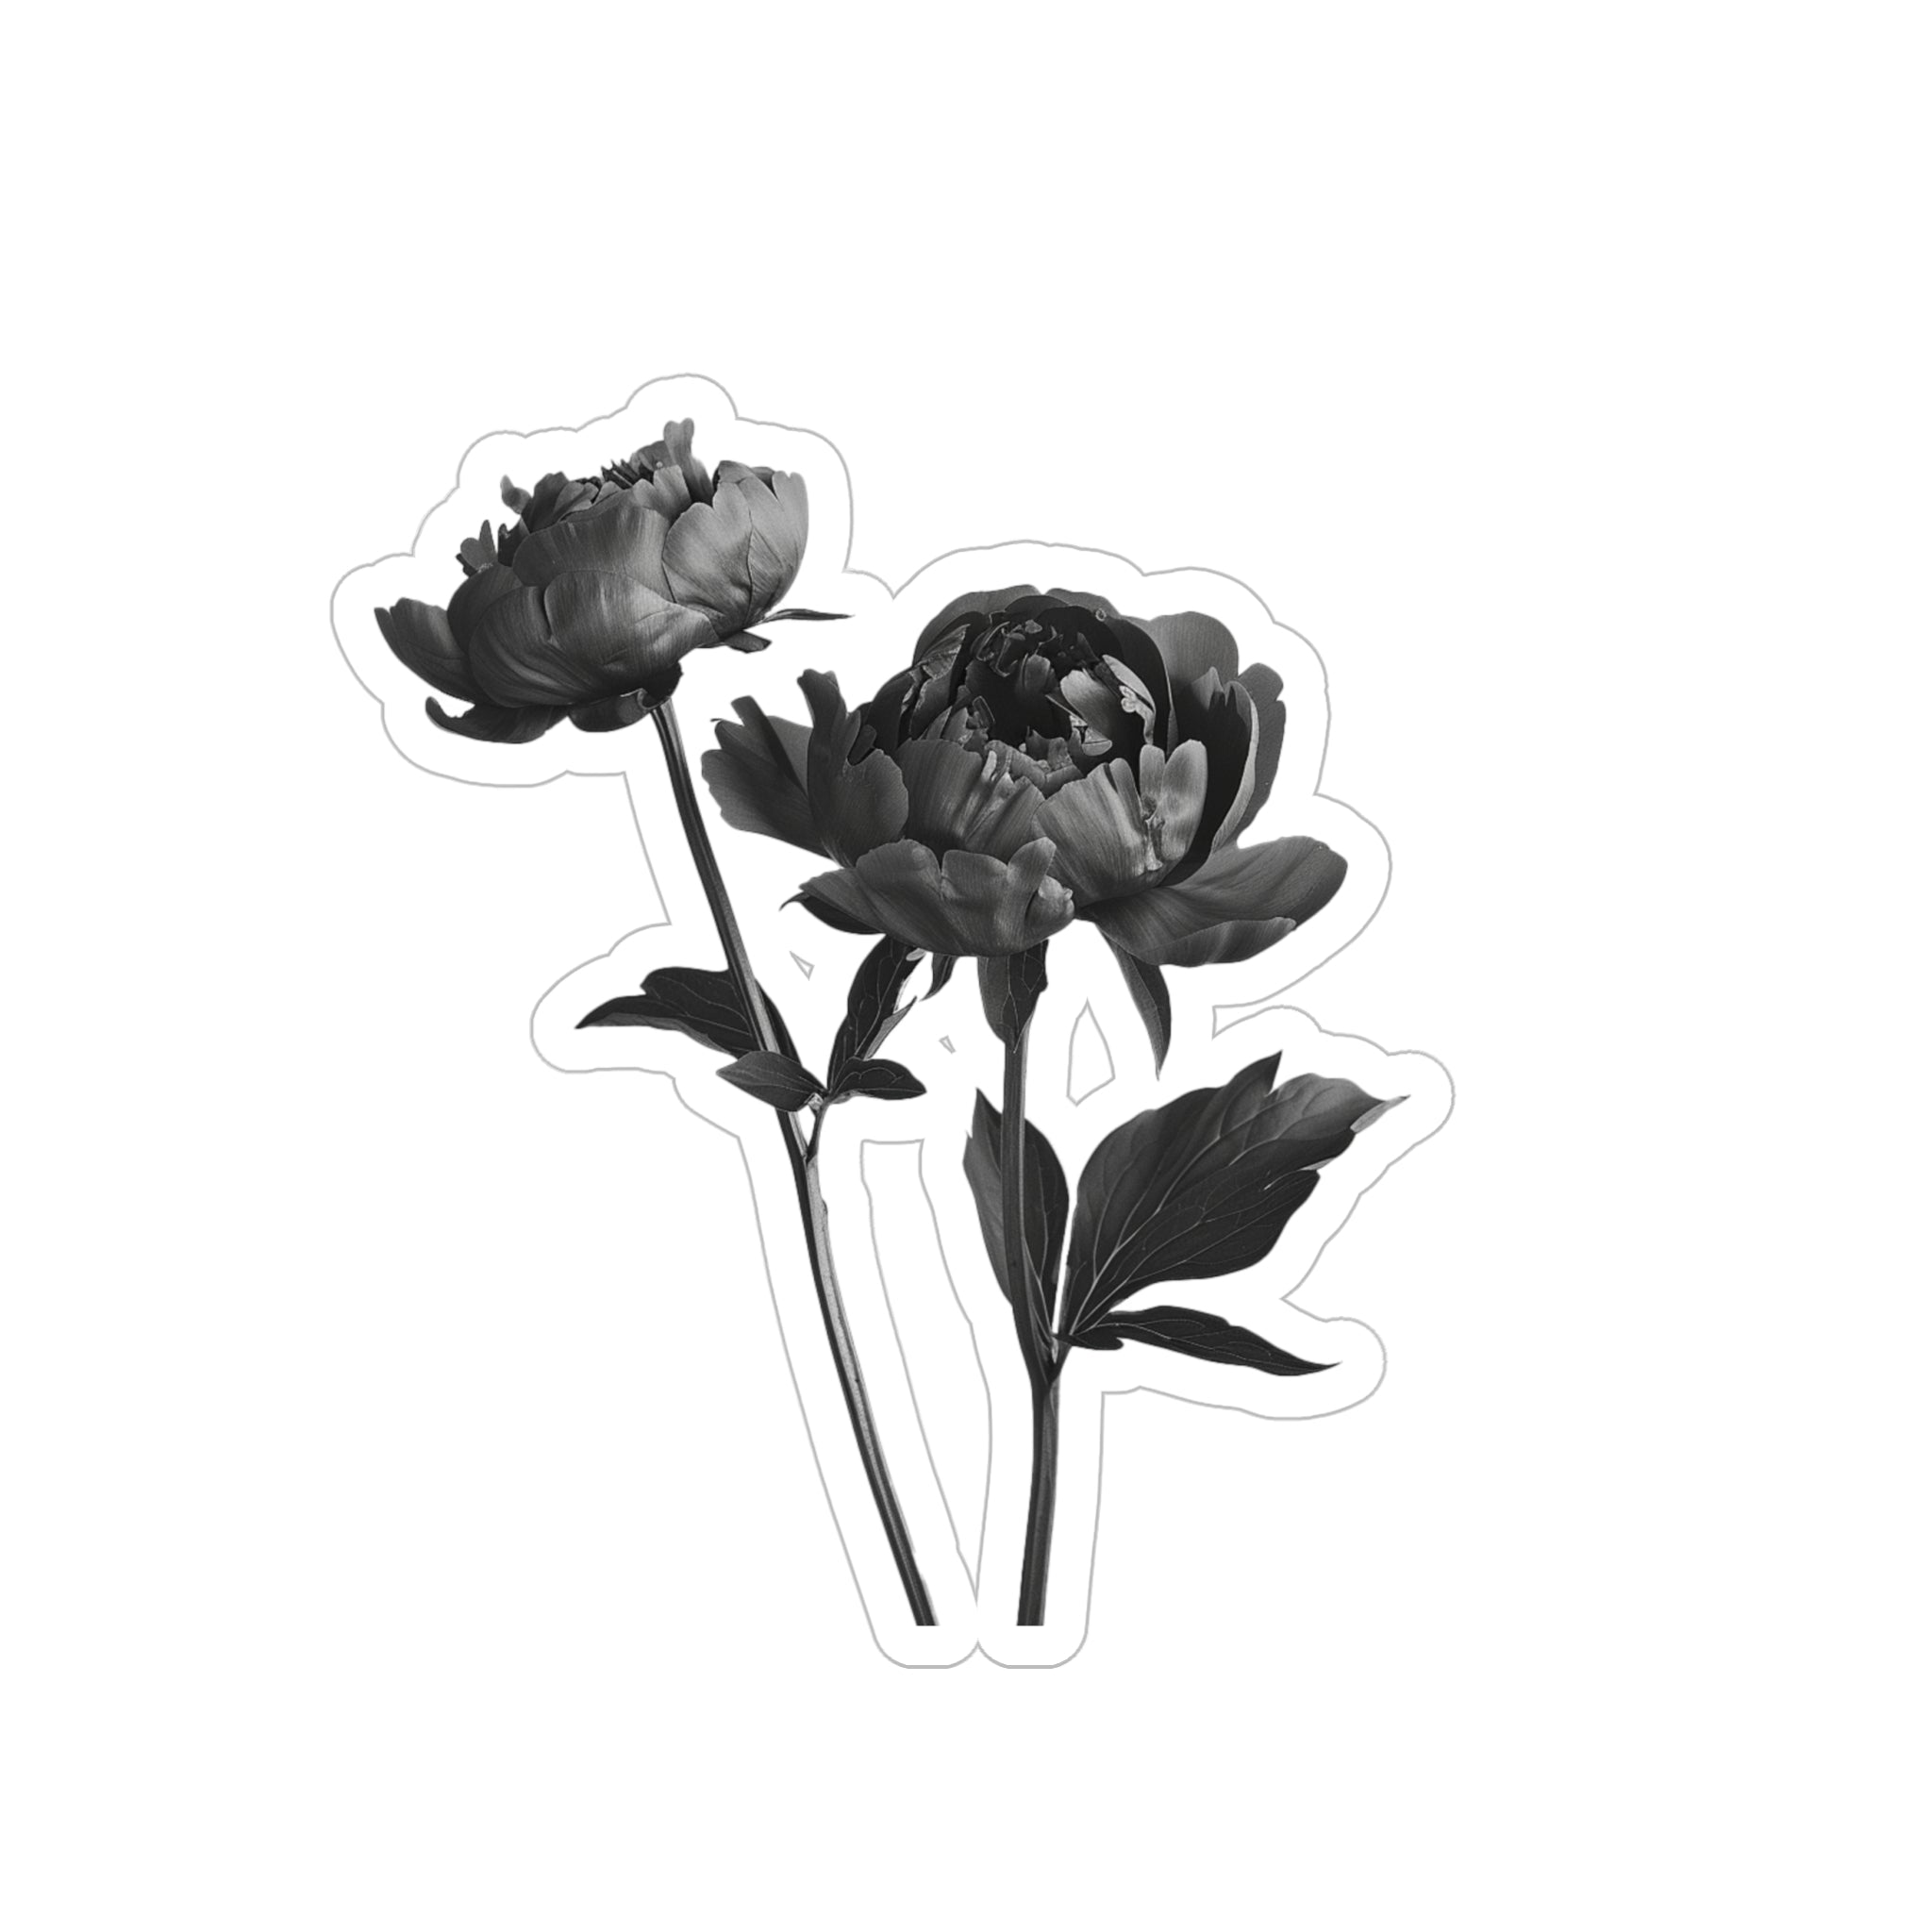 Black and white two peonies die-cut transparent sticker, made from water-resistant vinyl. Available in 4 sizes for indoor and outdoor use. Customize laptops, water bottles, cars, and more. Please note: Design may be difficult to see on dark surfaces, and small details may be cut as one shape. Assembled in the USA from globally sourced parts. Embrace the opulent beauty and natural grace of peonies in your everyday life.